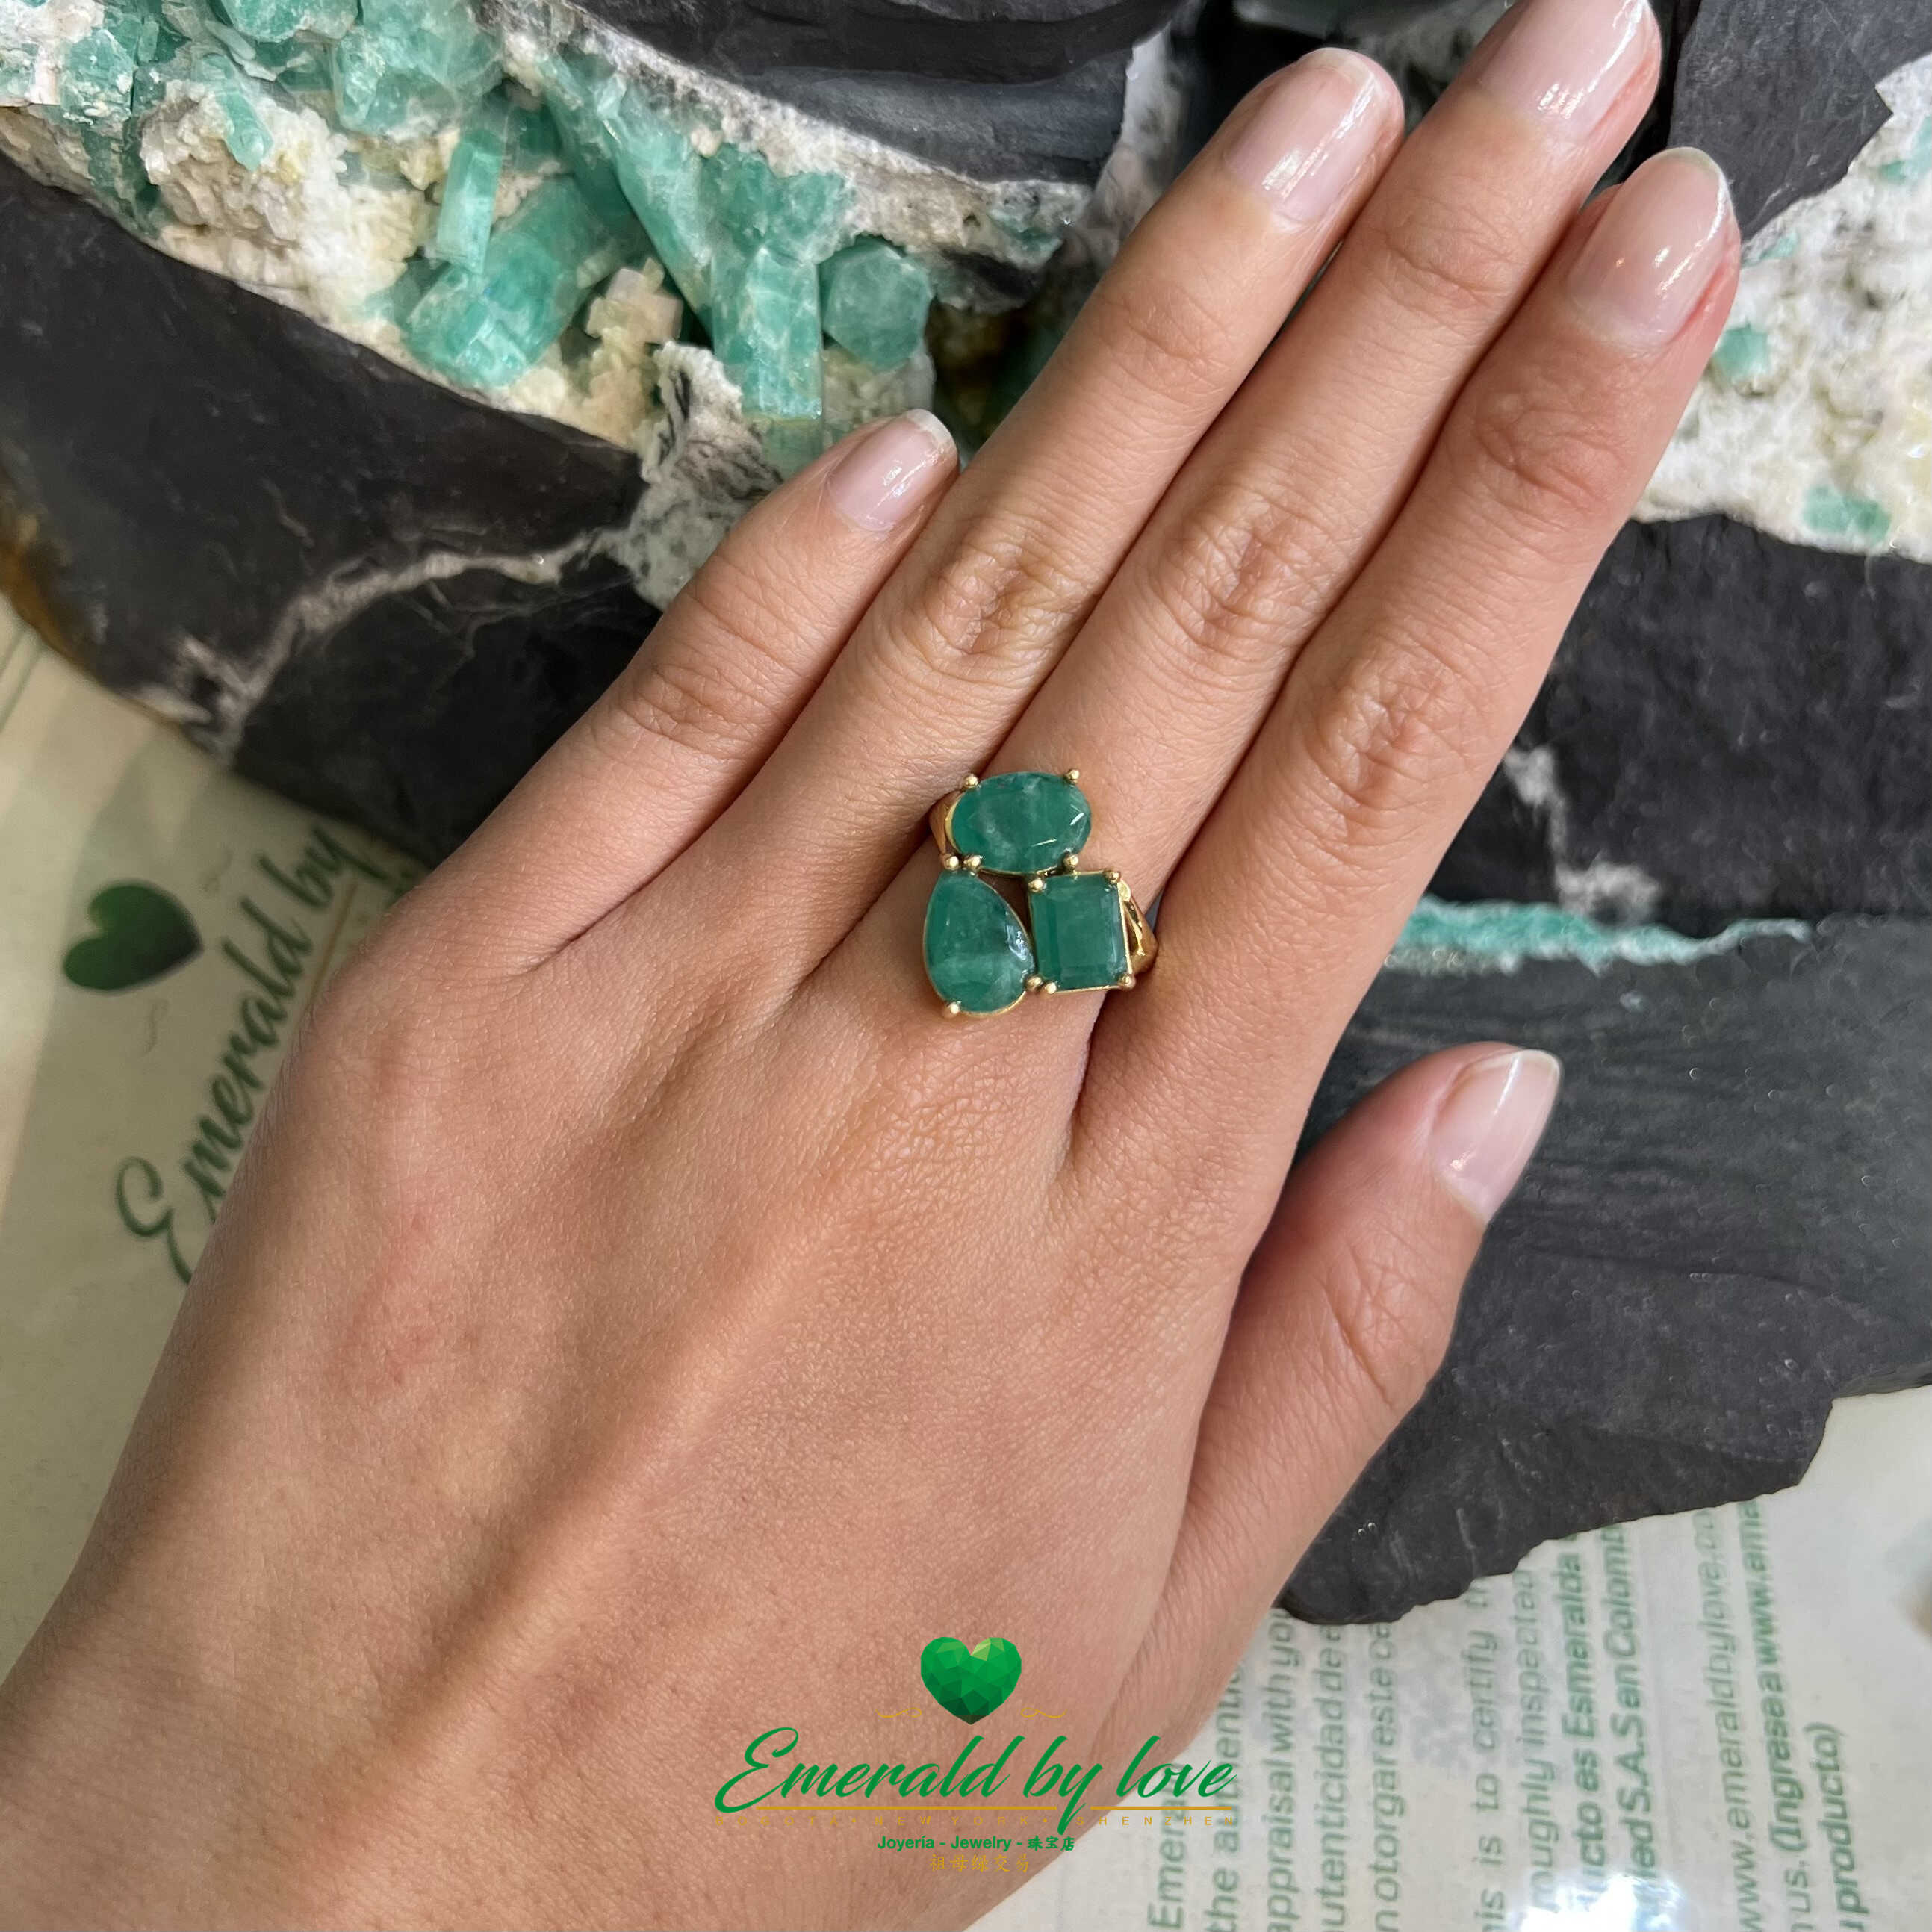 Trilogy of Elegance: Yellow Gold Ring with Three Colombian Emeralds